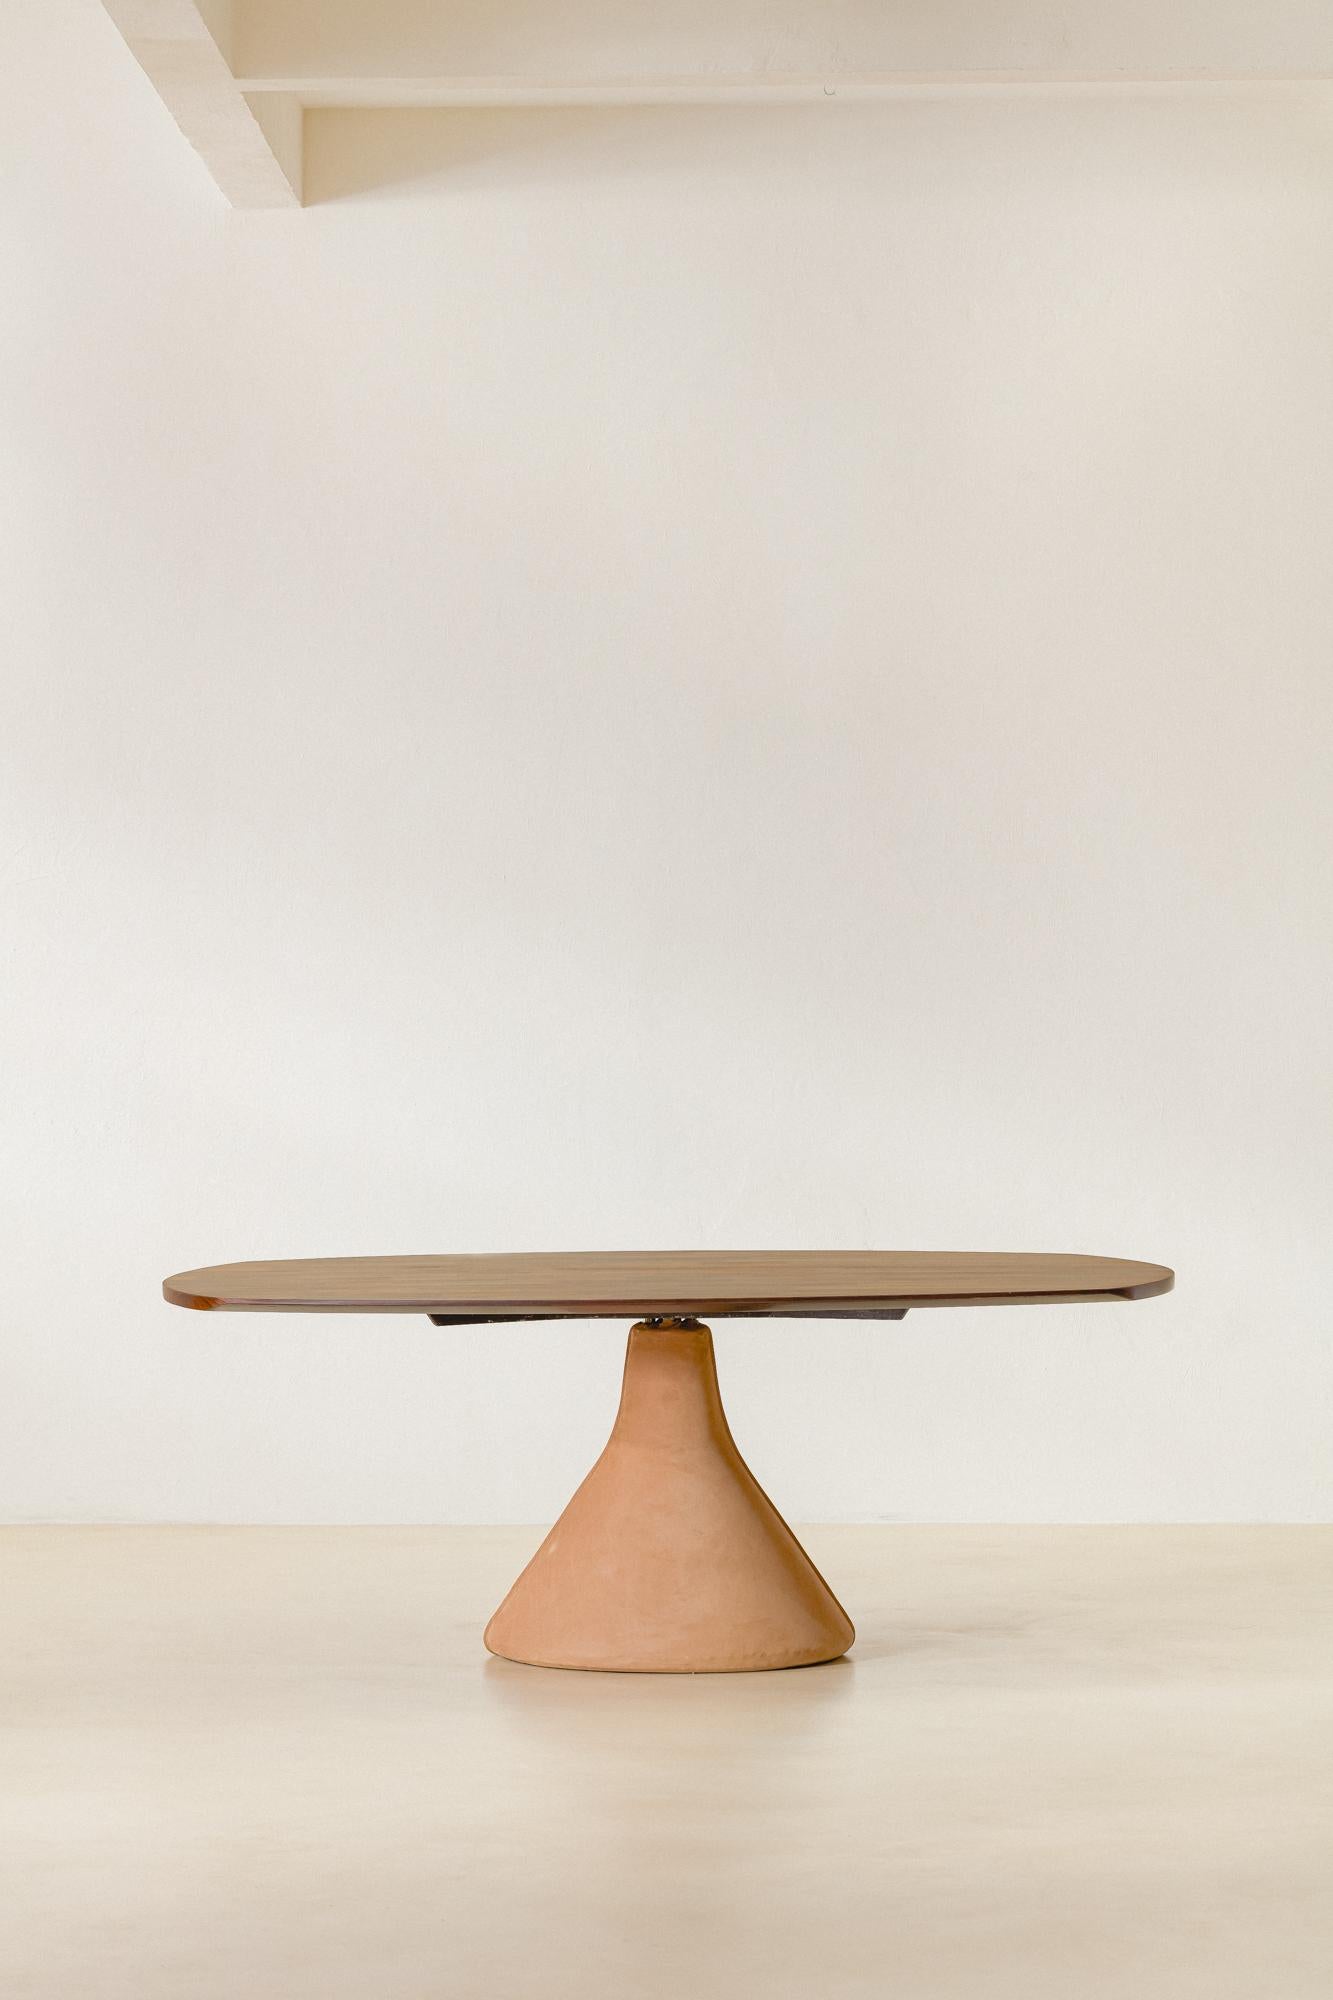 The iconic Guanabara is a table designed by Jorge Zalszupin (1922-2020) in 1959 and produced by his company, L'atelier. A rosewood patchwork top rests over one concrete base finished with soft nubuck leather.

This patchwork solution is present in